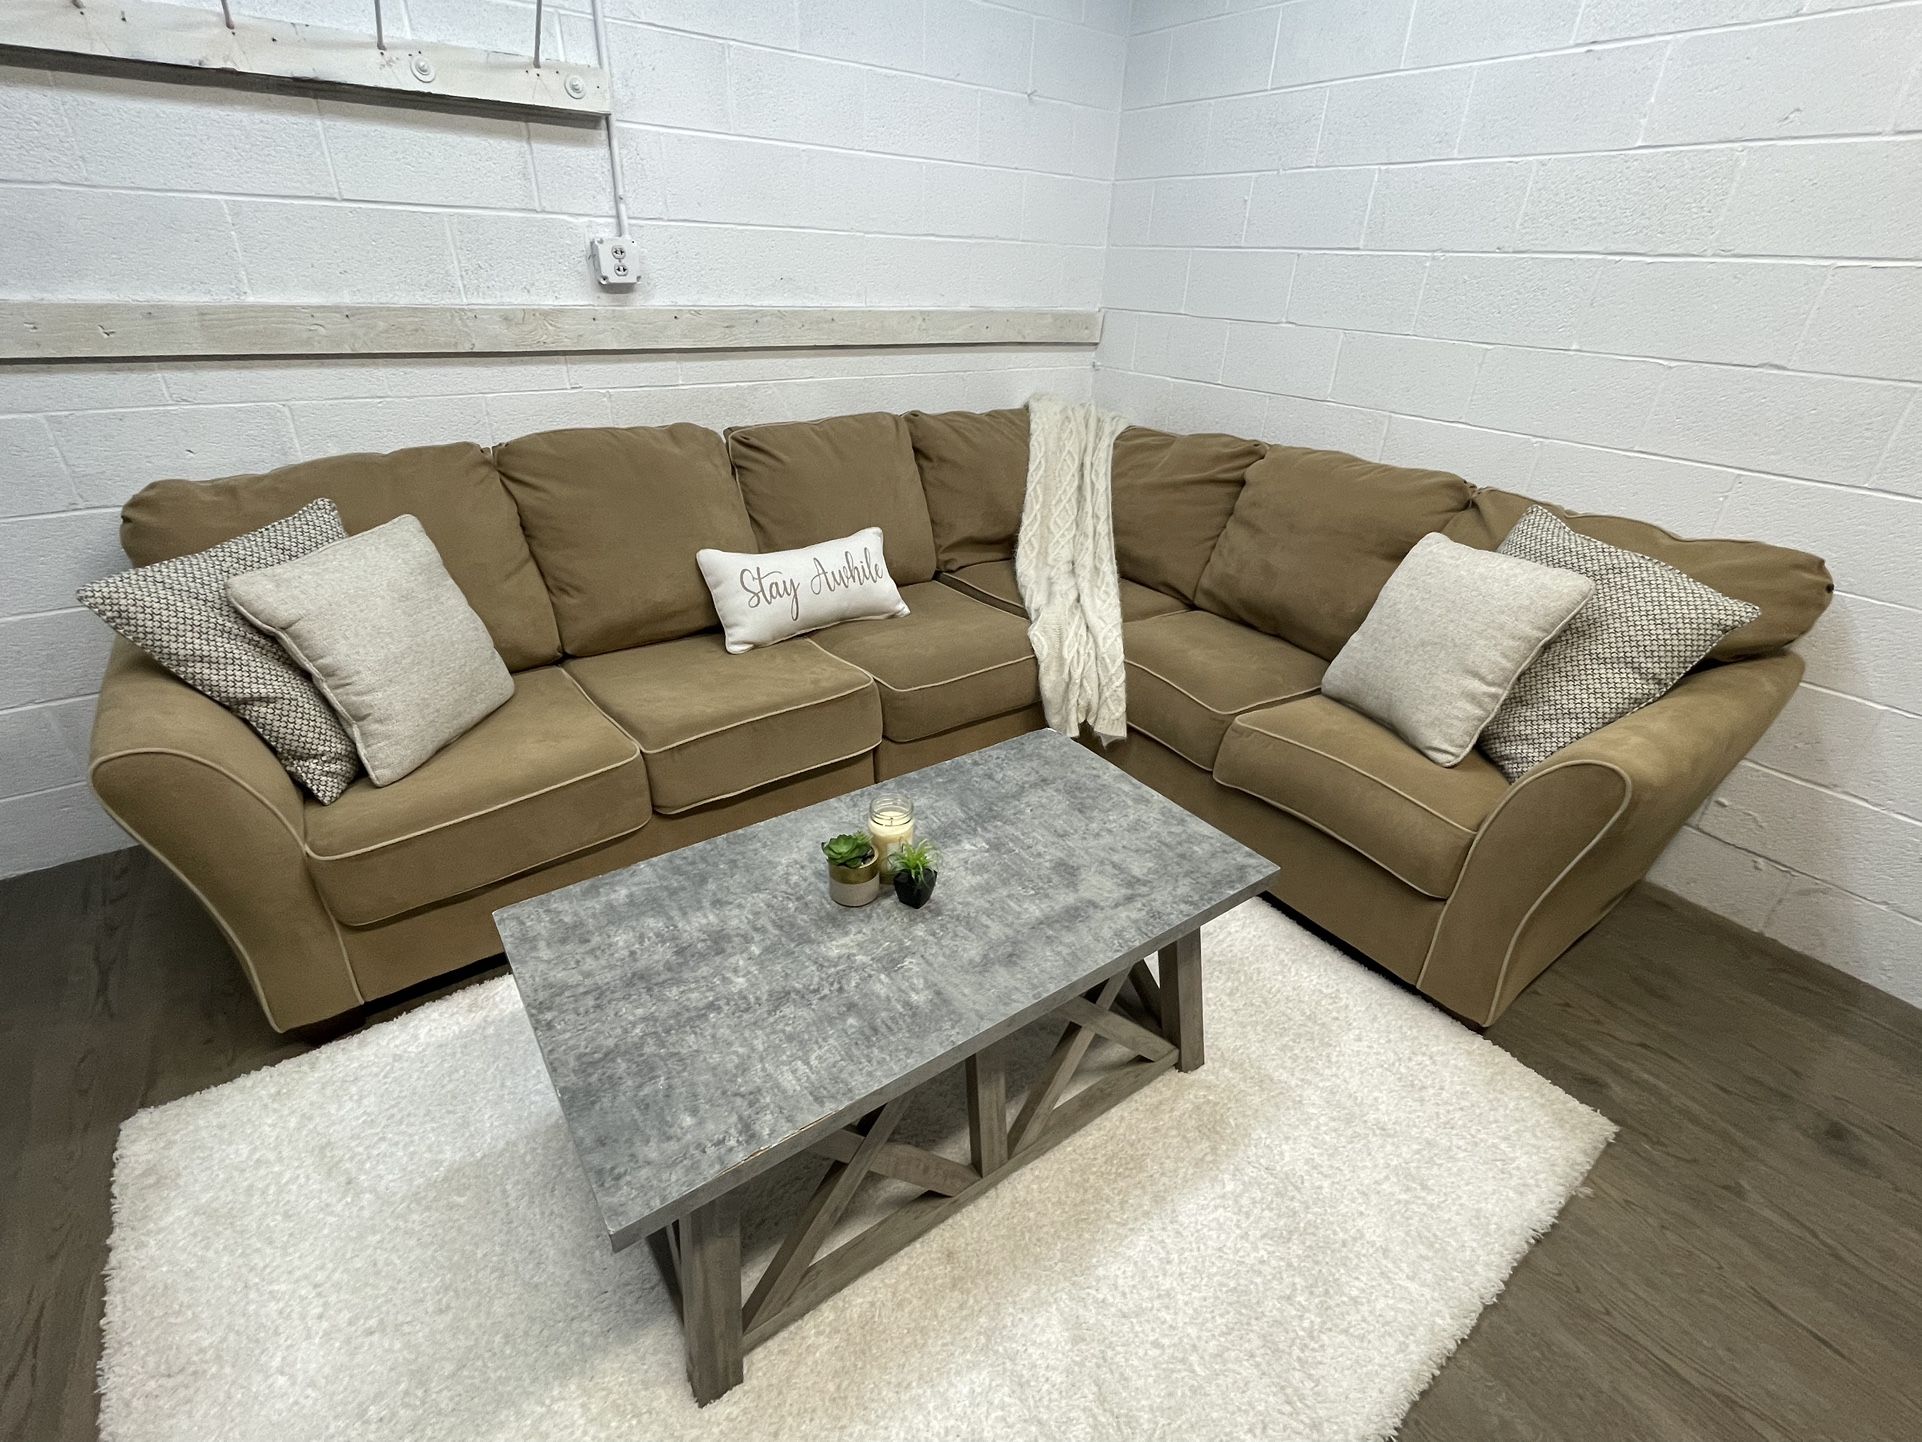 $550 OBO Beige Sectional for Sale. Delivery Available!